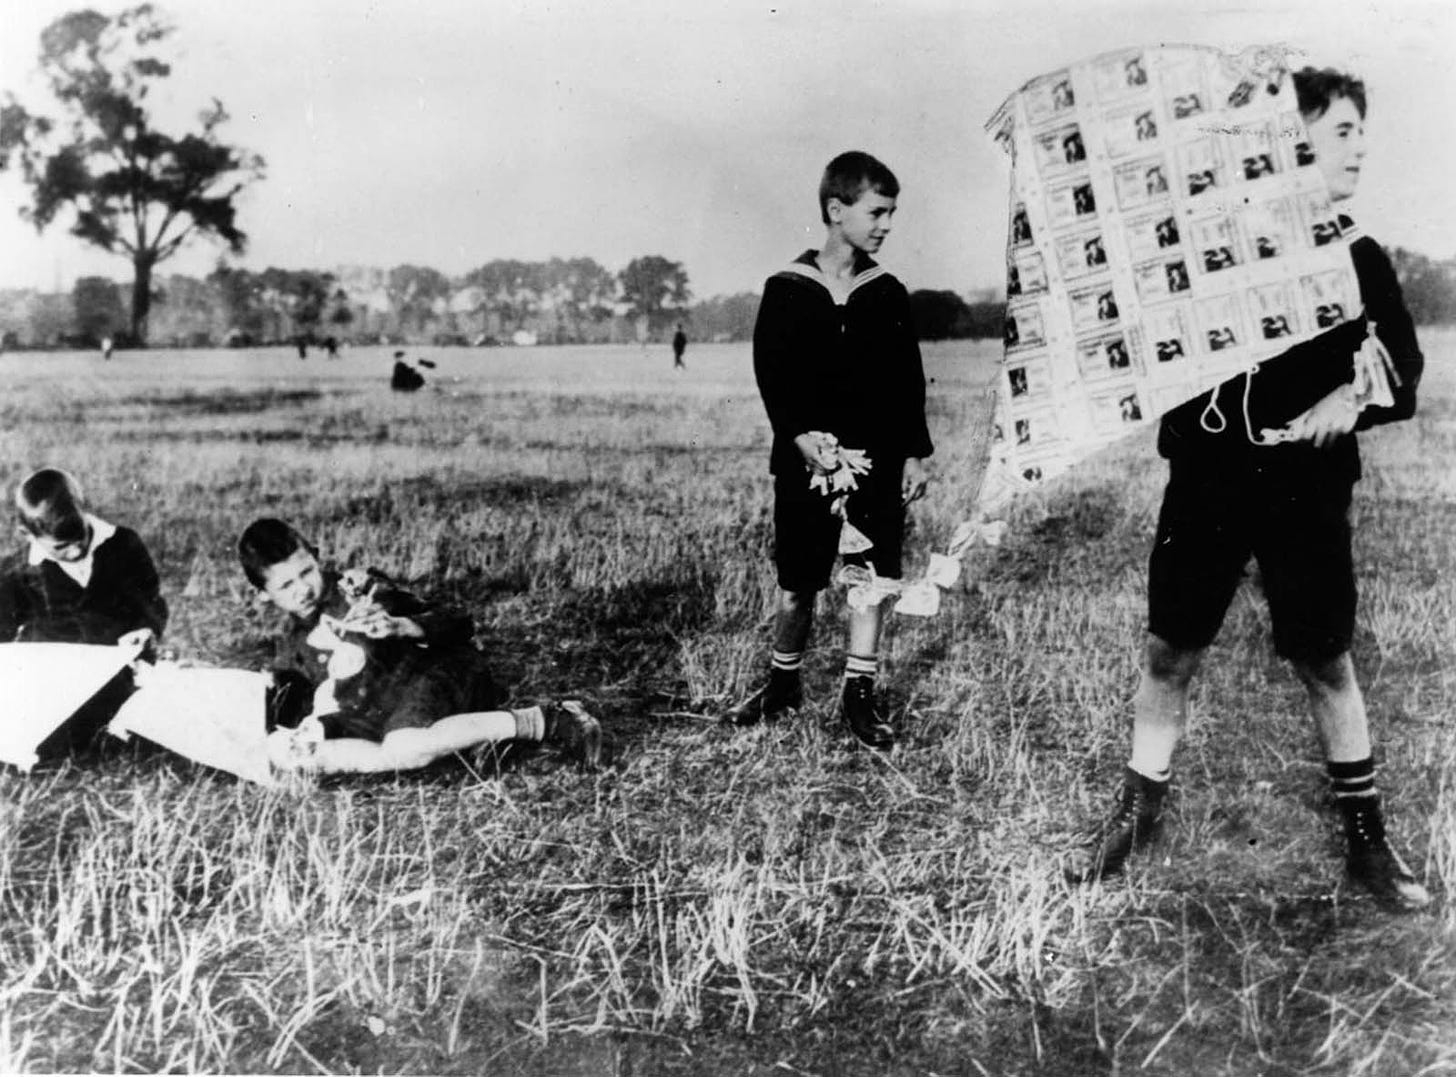 Boys fly a kite made of banknotes. 1922.